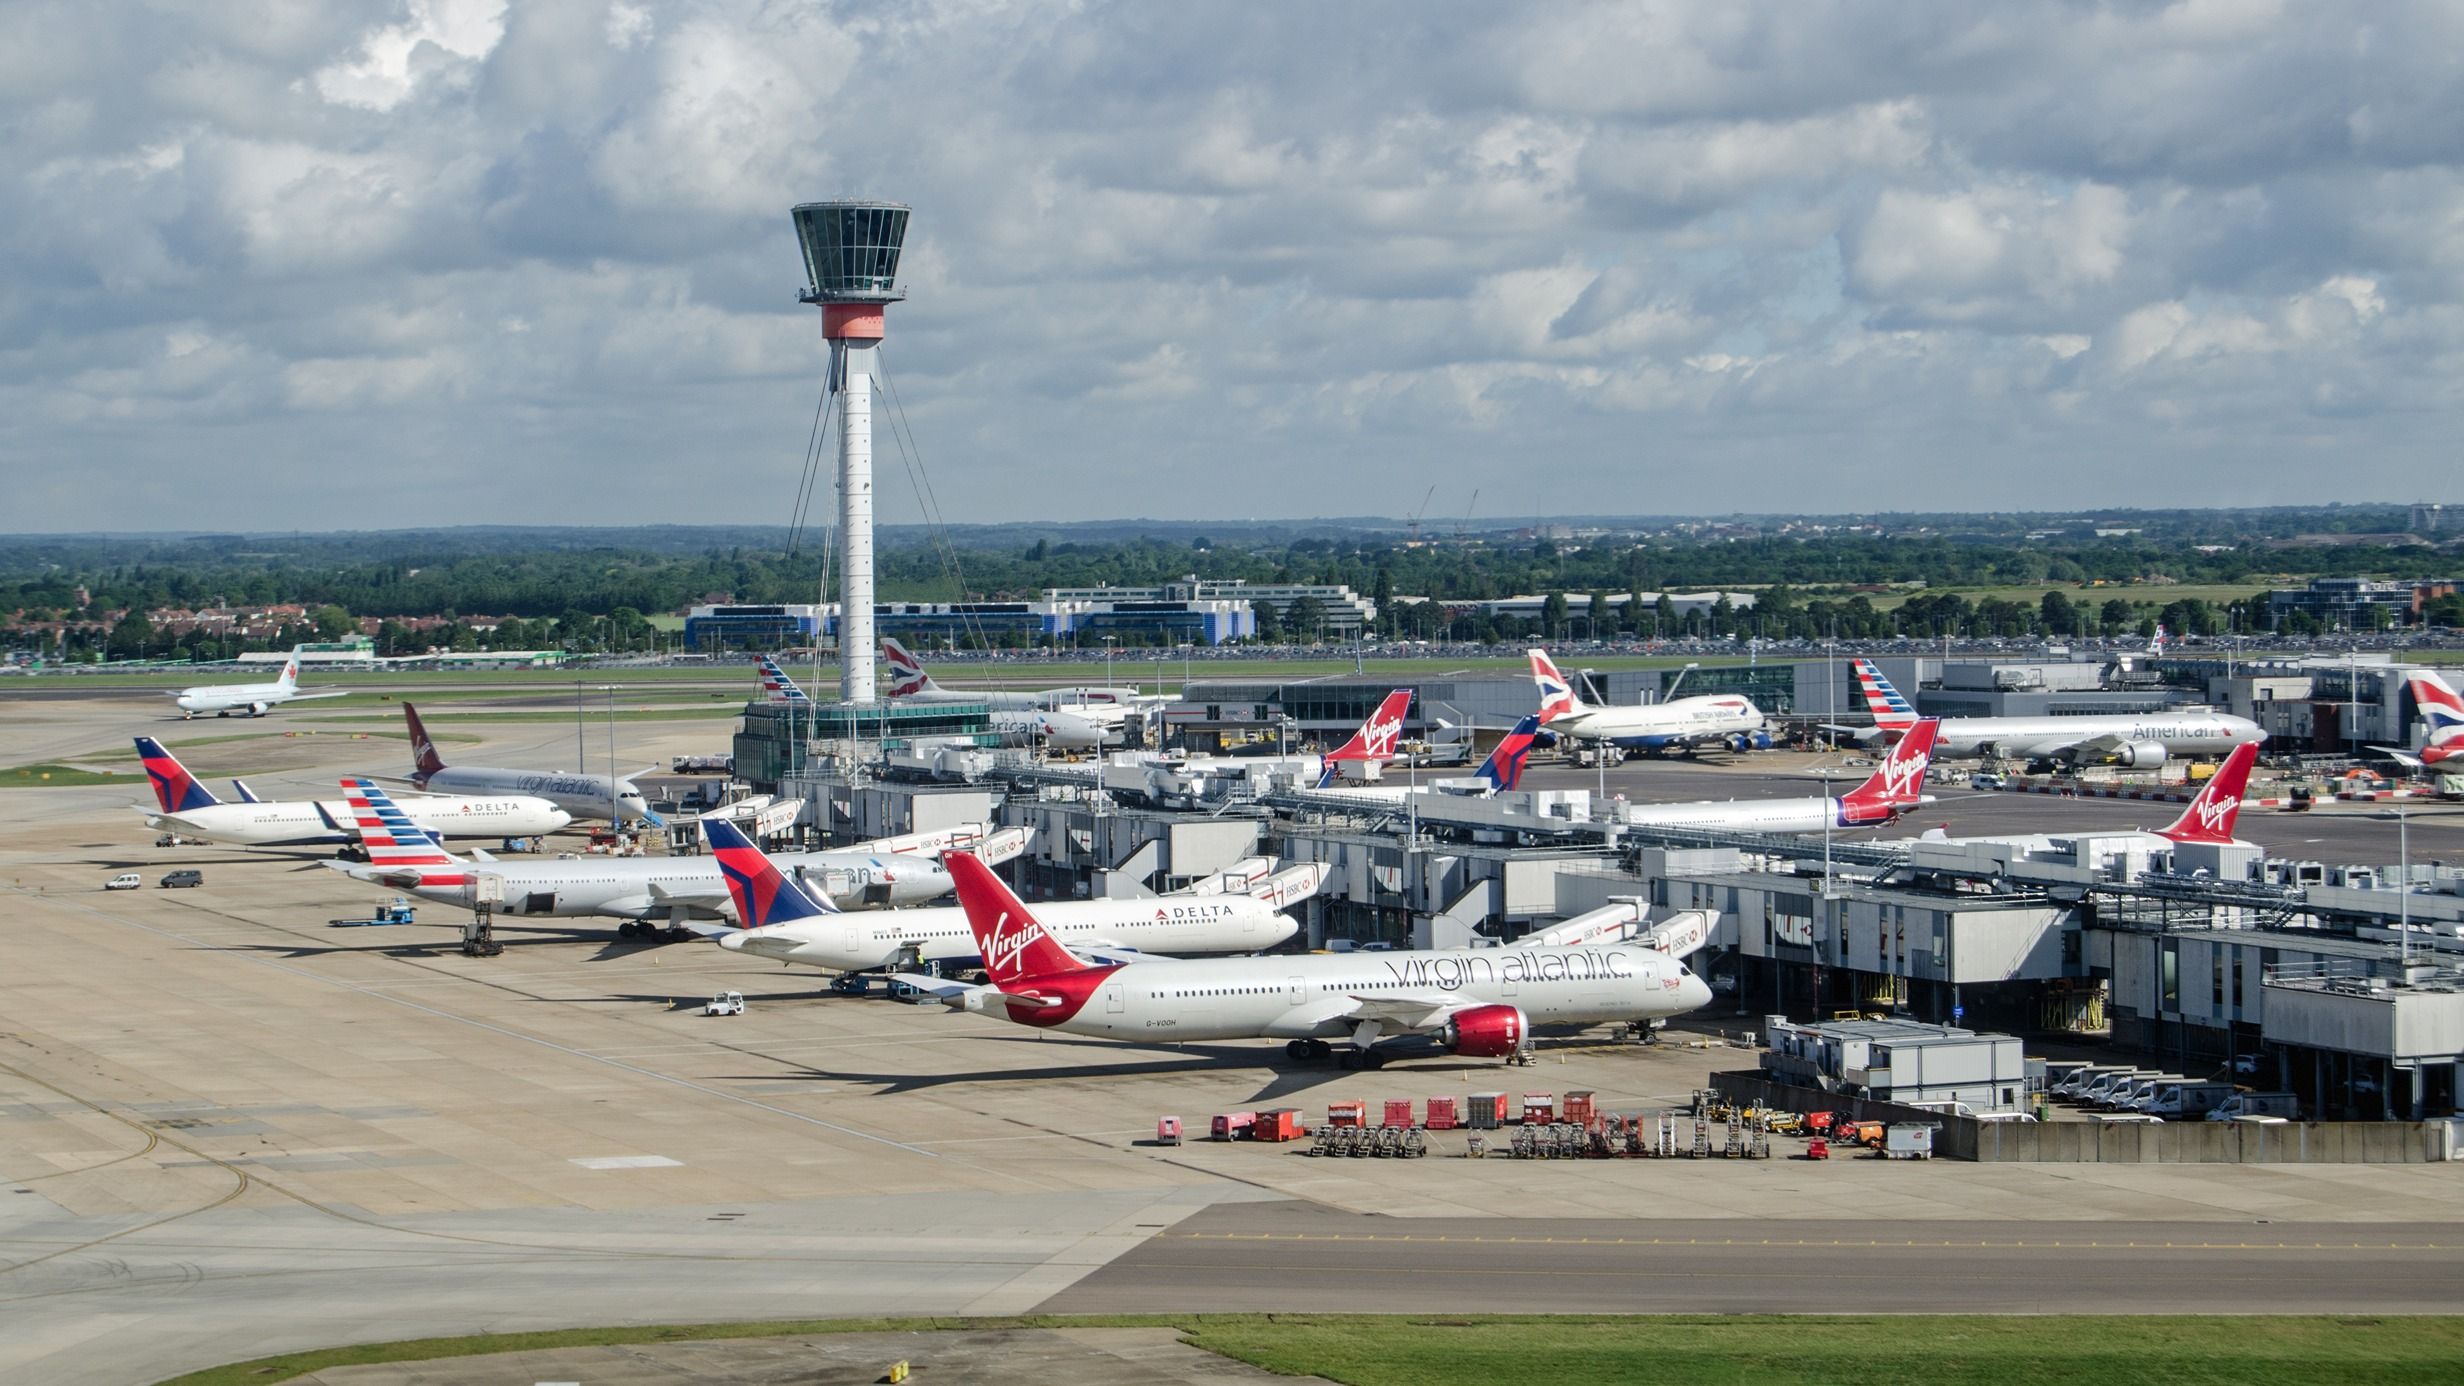 London Heathrow Achieves Record-Breaking Numbers Serving Nearly 82 Million Passengers